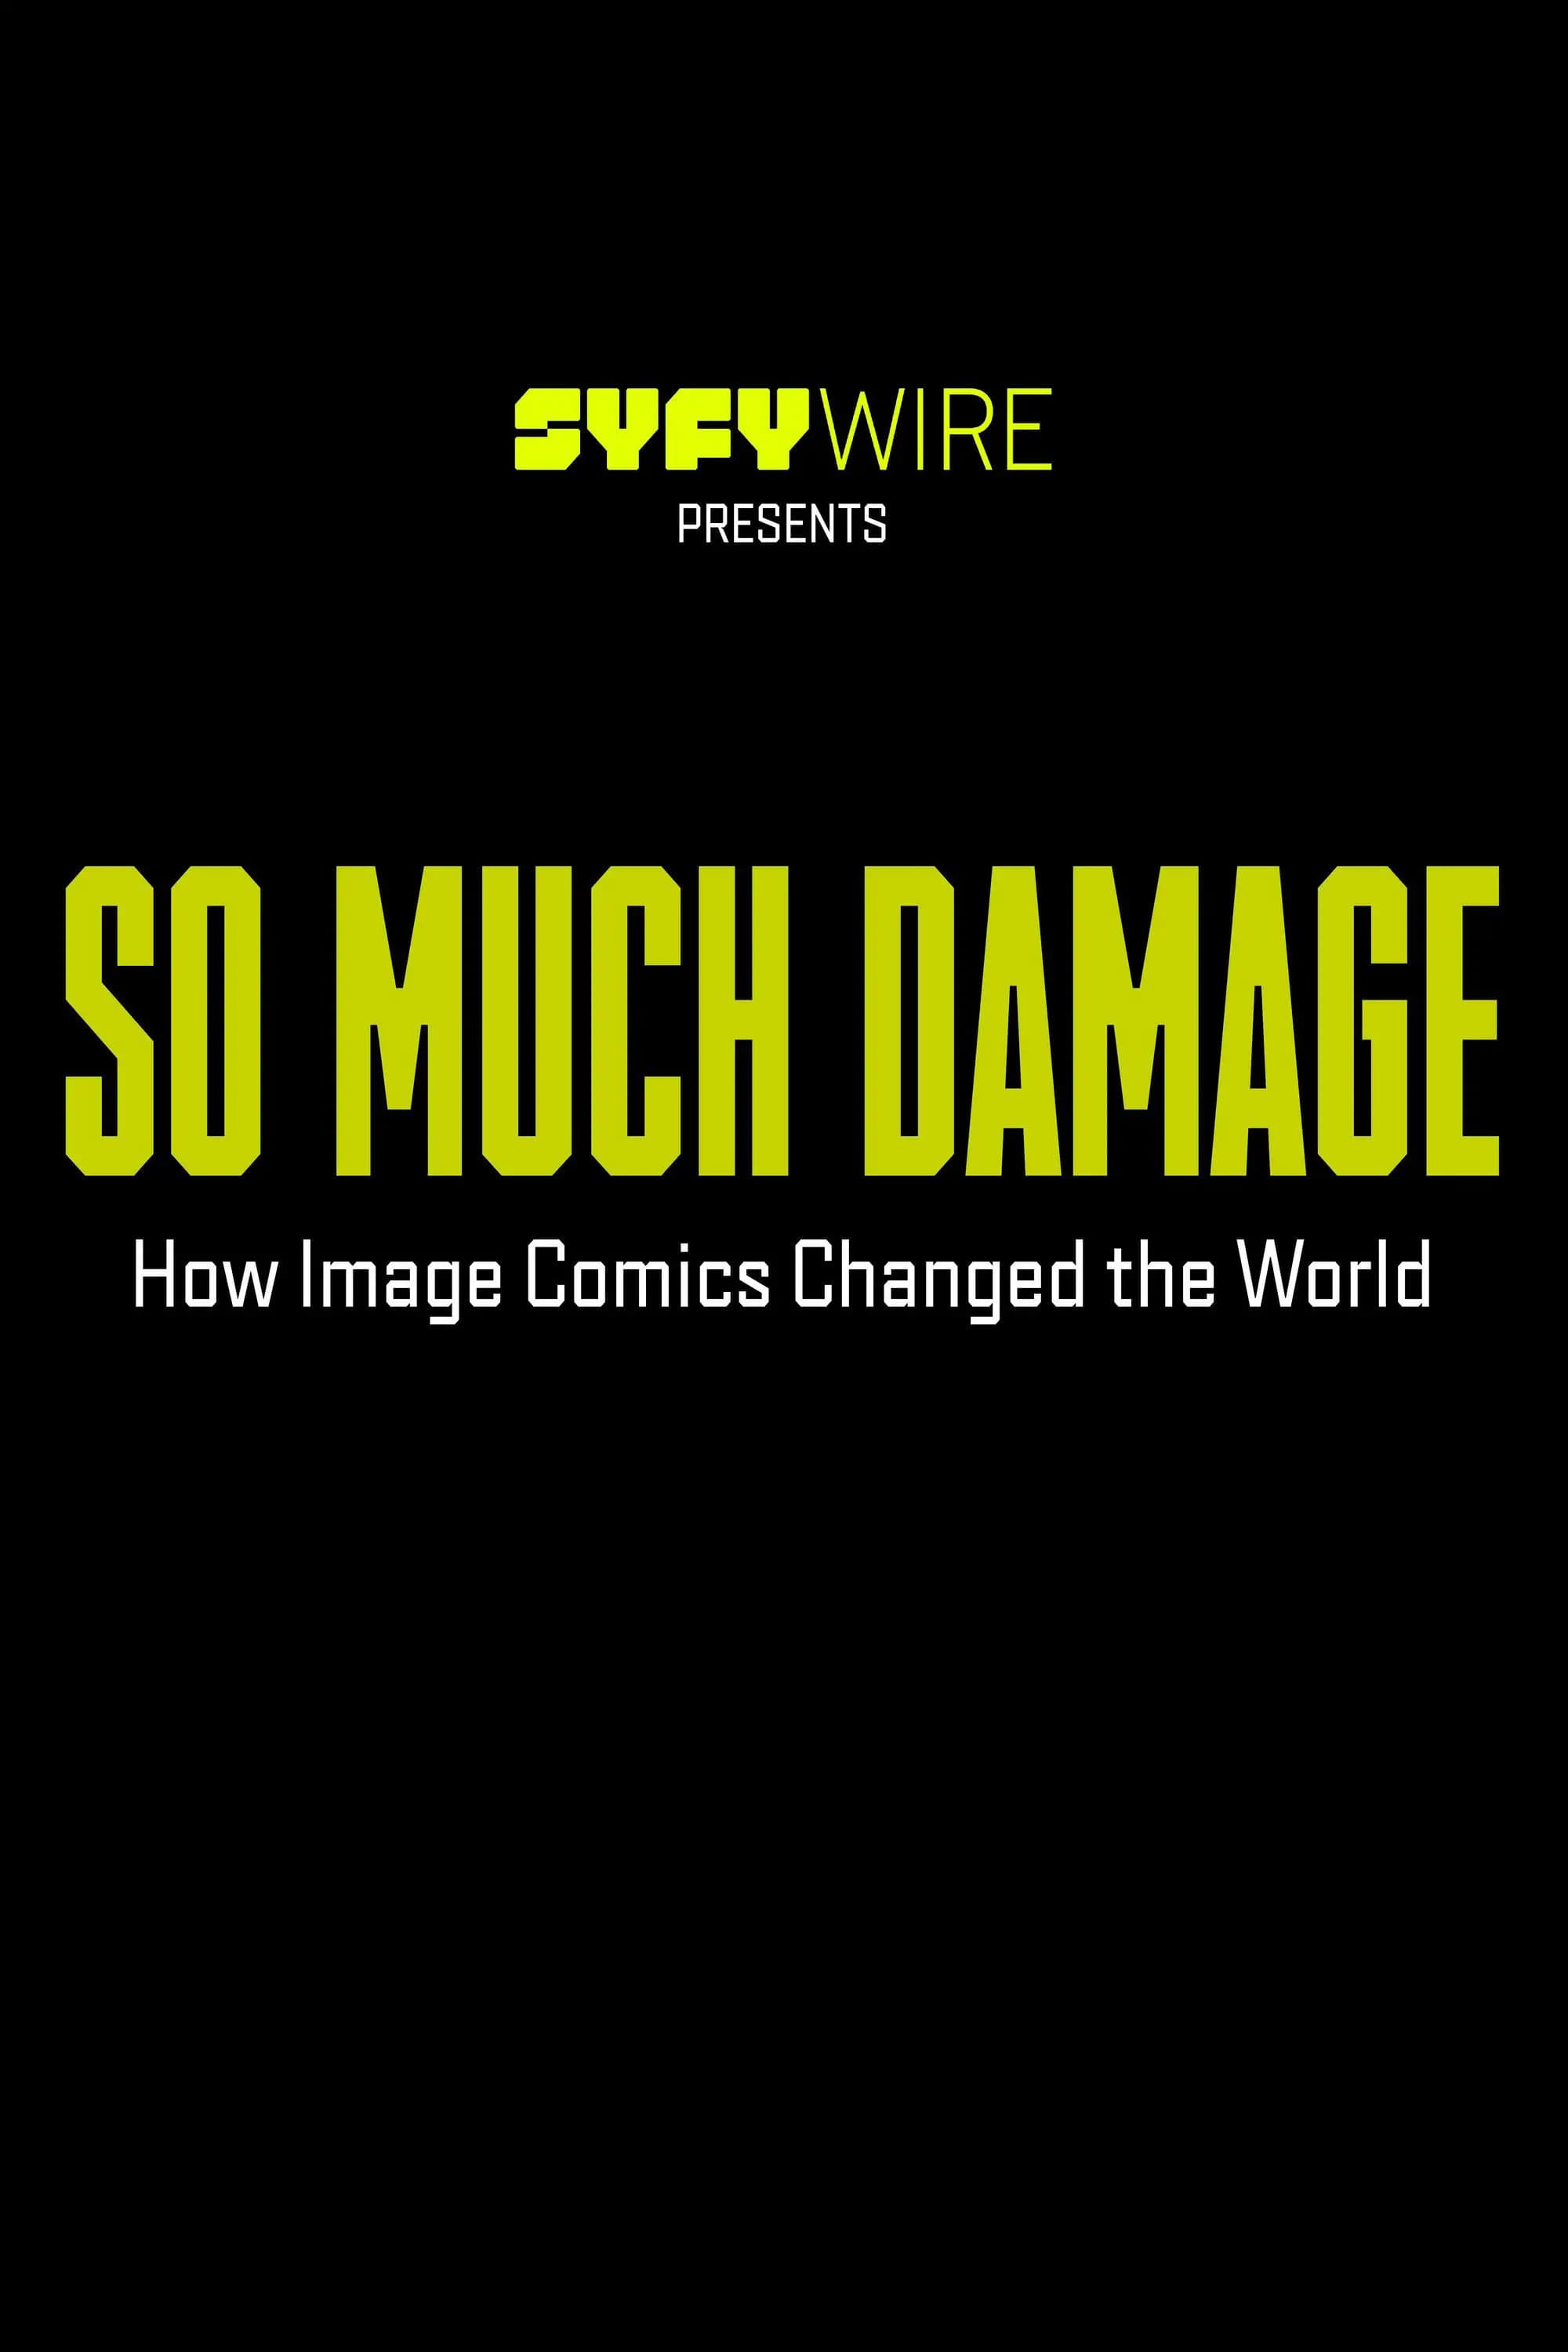 So Much Damage: How Image Comics Changed the World